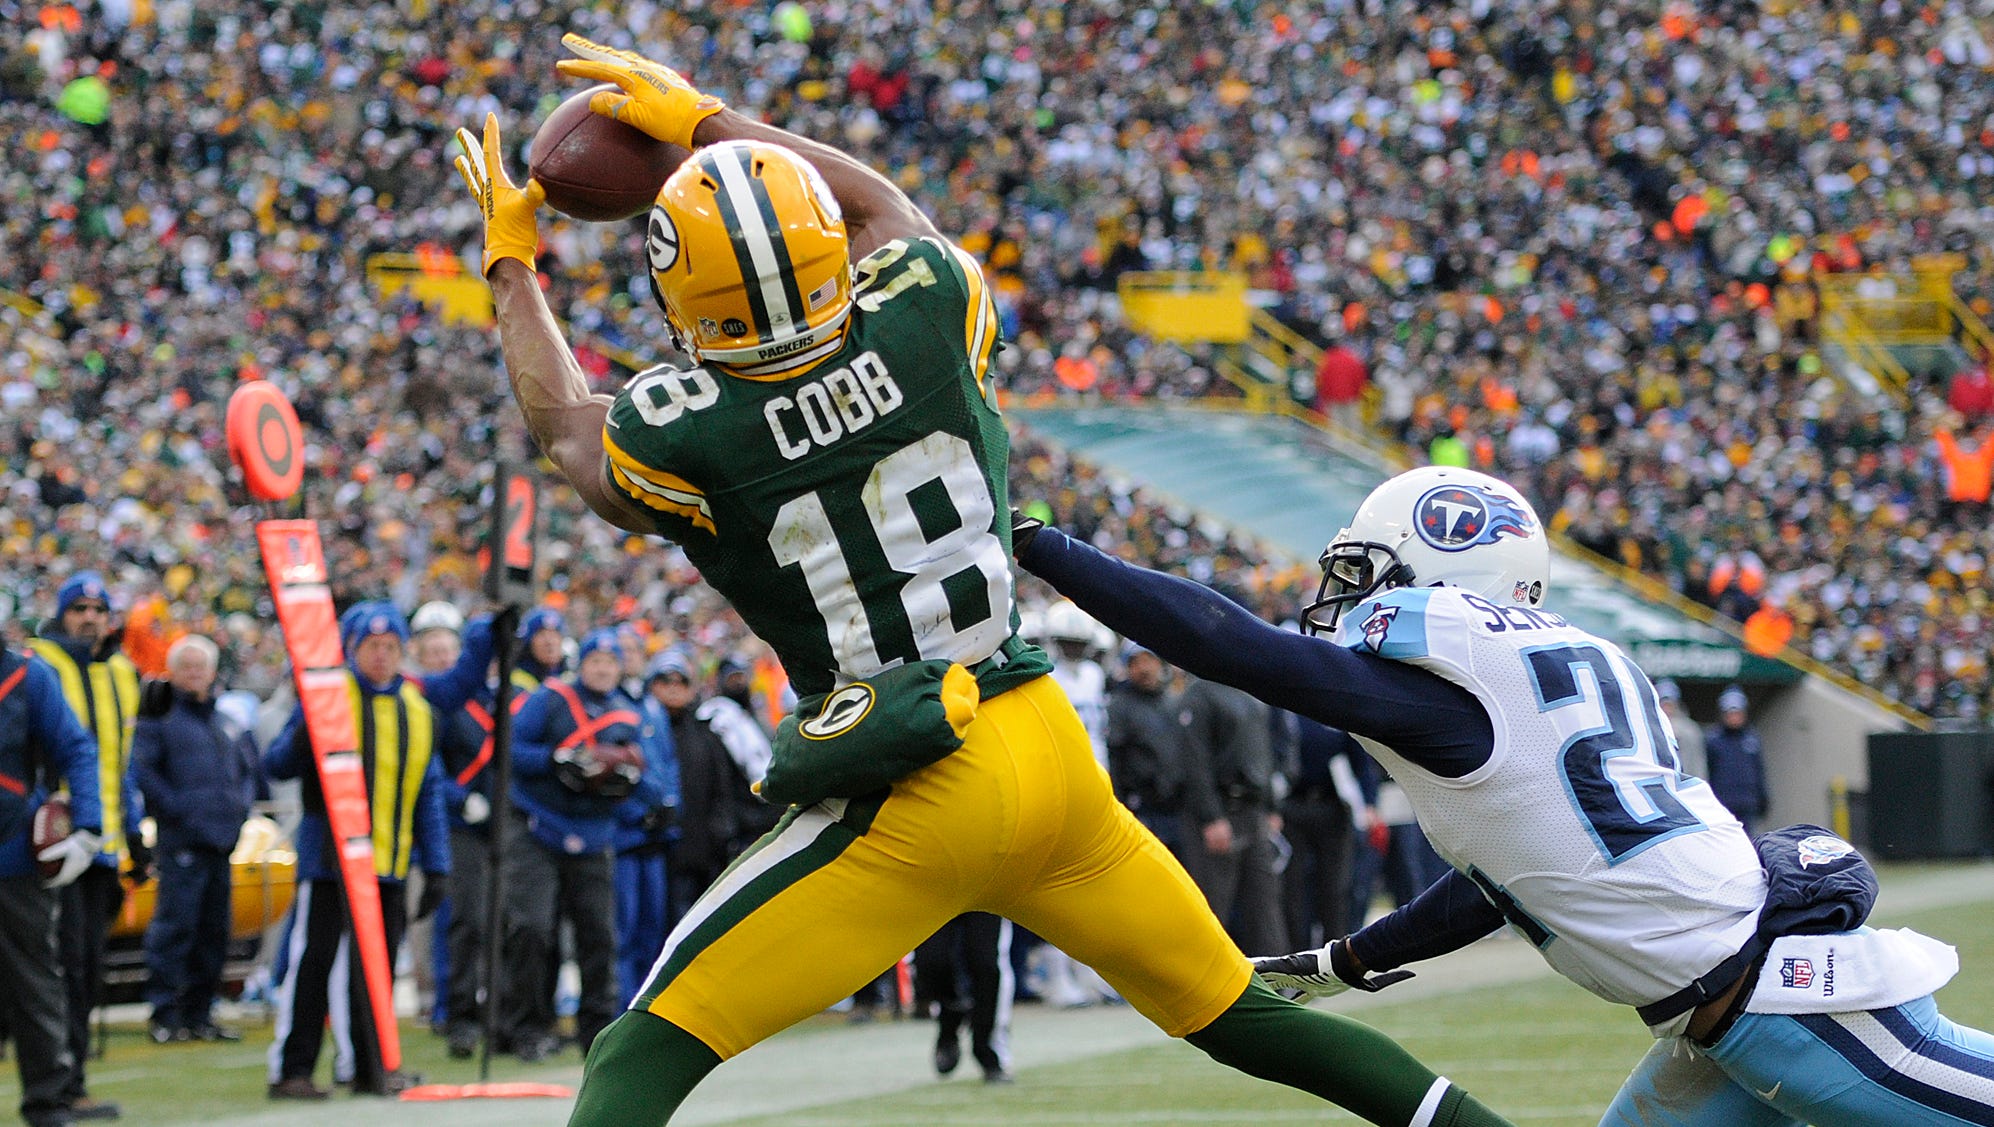 Green Bay Packers receiver Randall Cobb (18) makes a touchdown catch past Tennessee Titans cornerback Coty Sensabaugh (24) in a 2012 game at Lambeau Field.